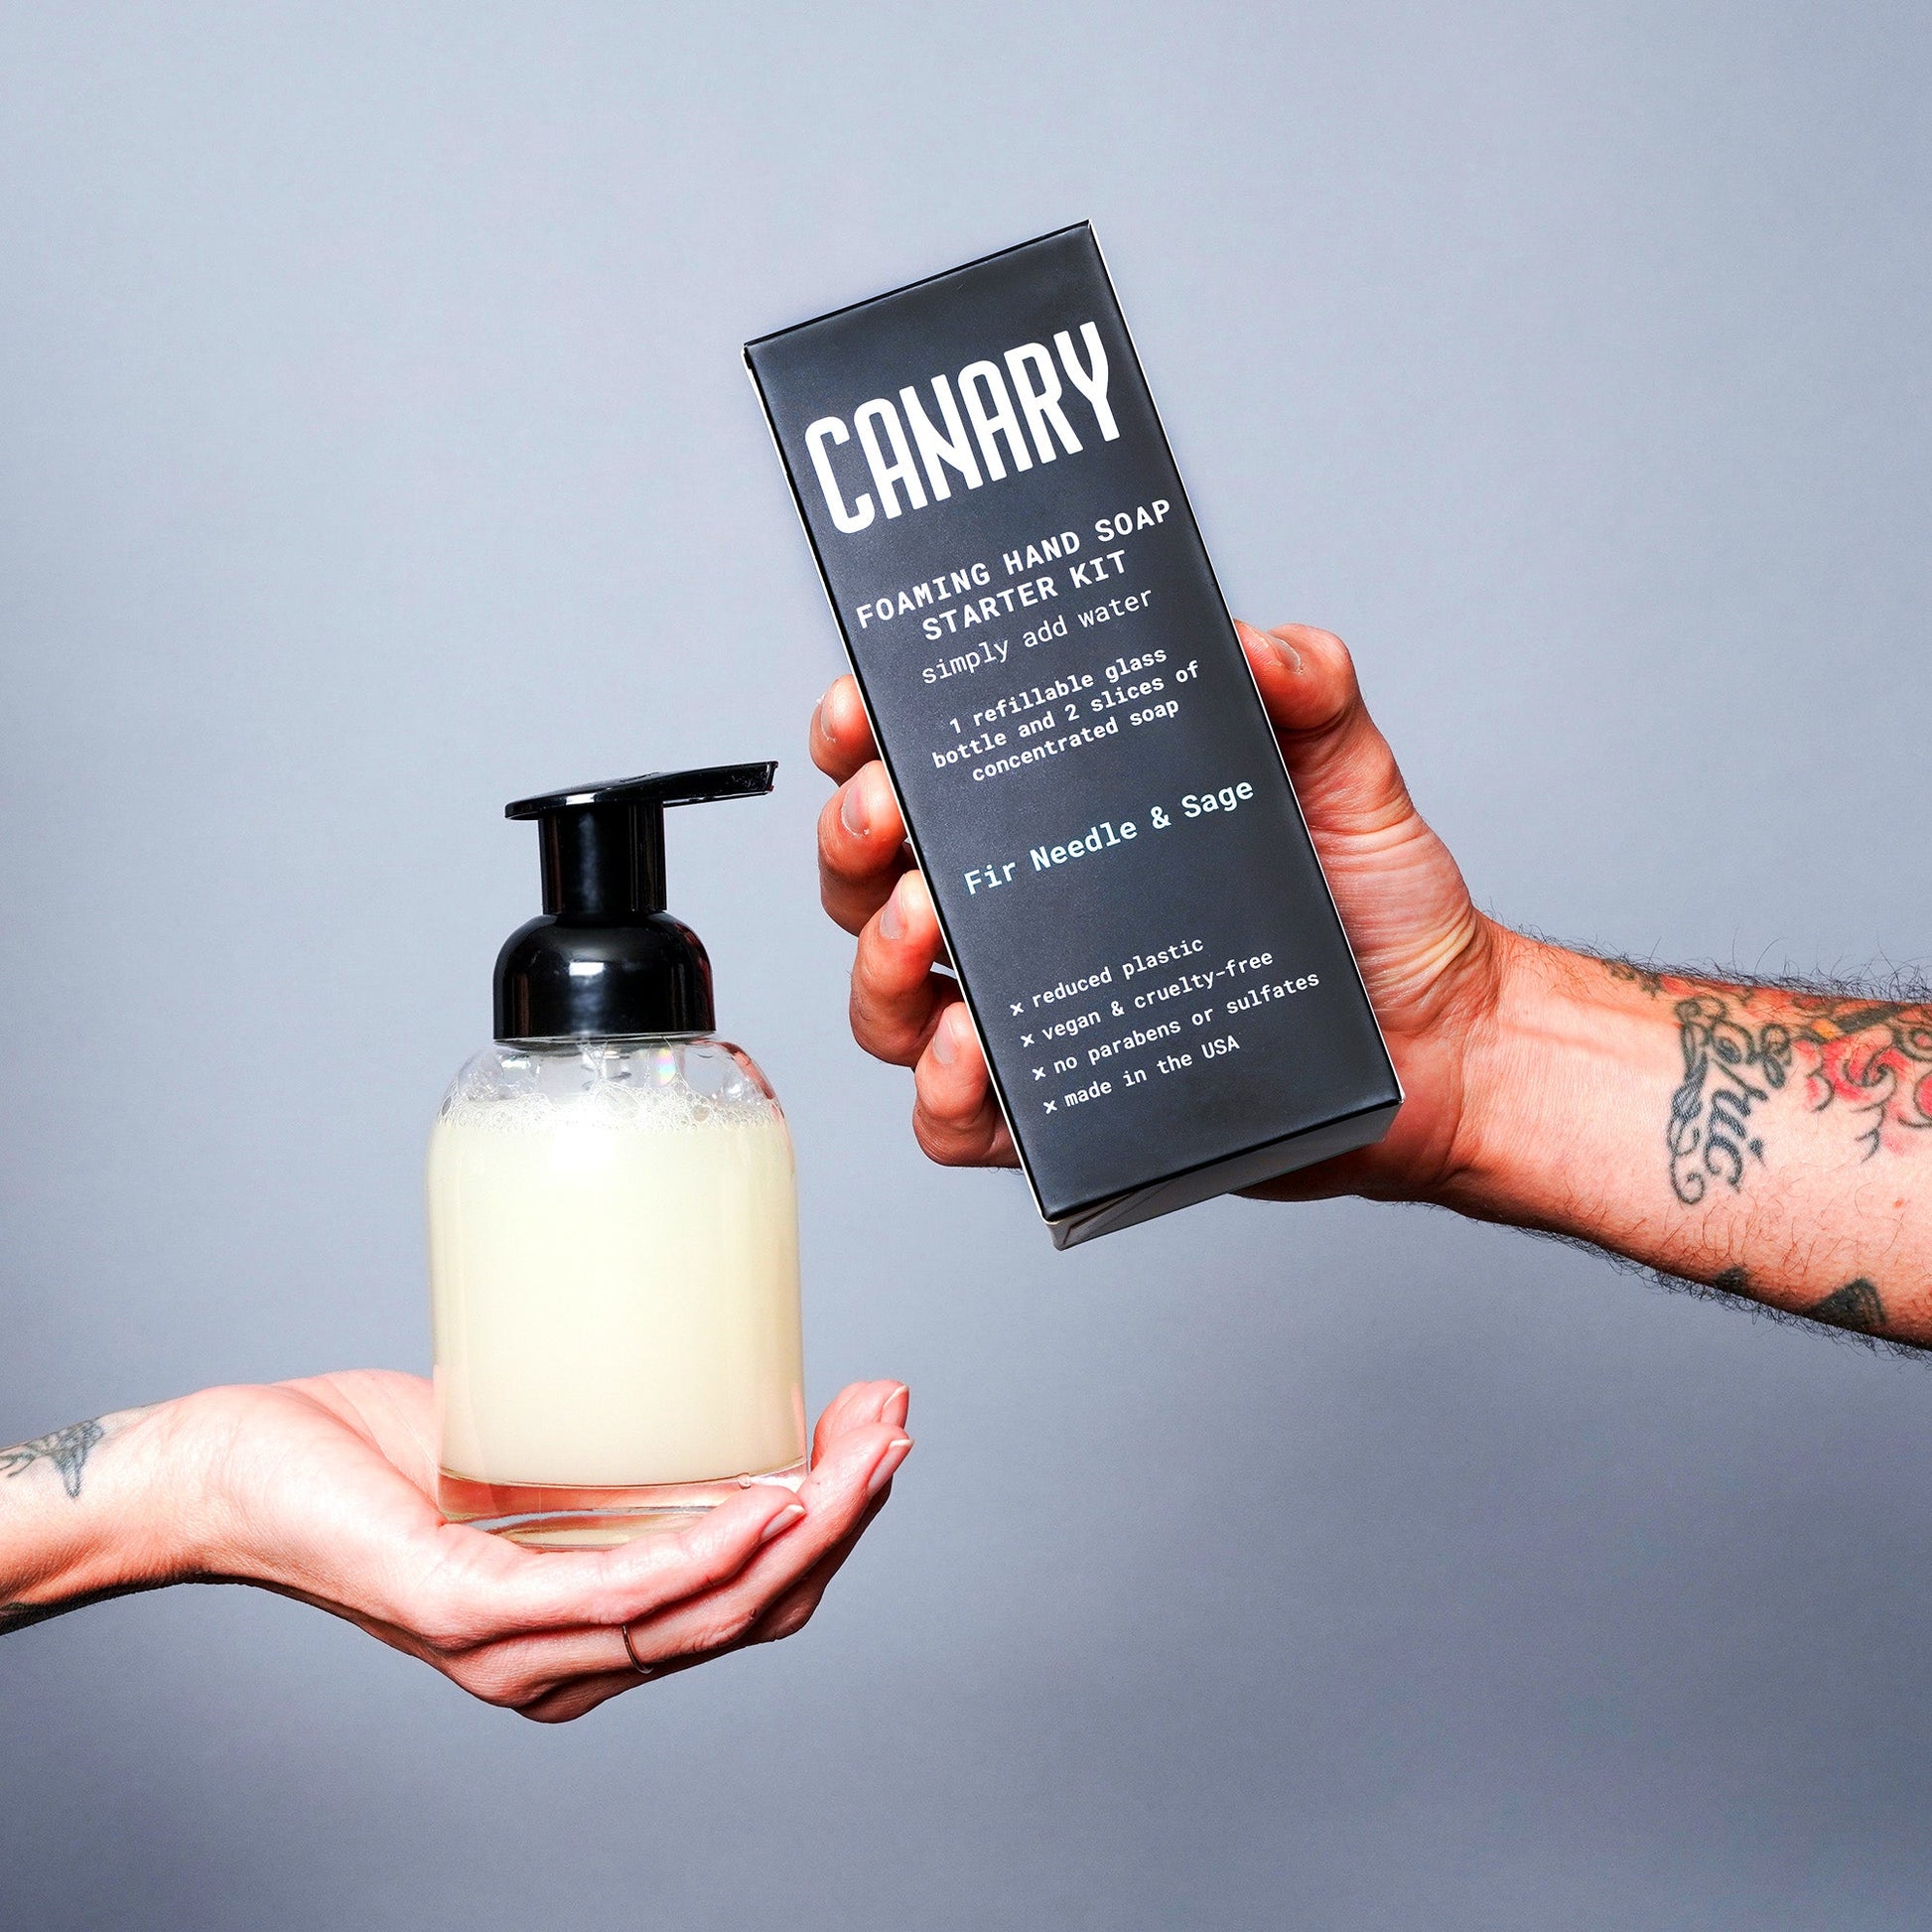 Unboxing of the Canary Concentrated Foaming Hand Soap Kit. Bottle and Soap Slices Included